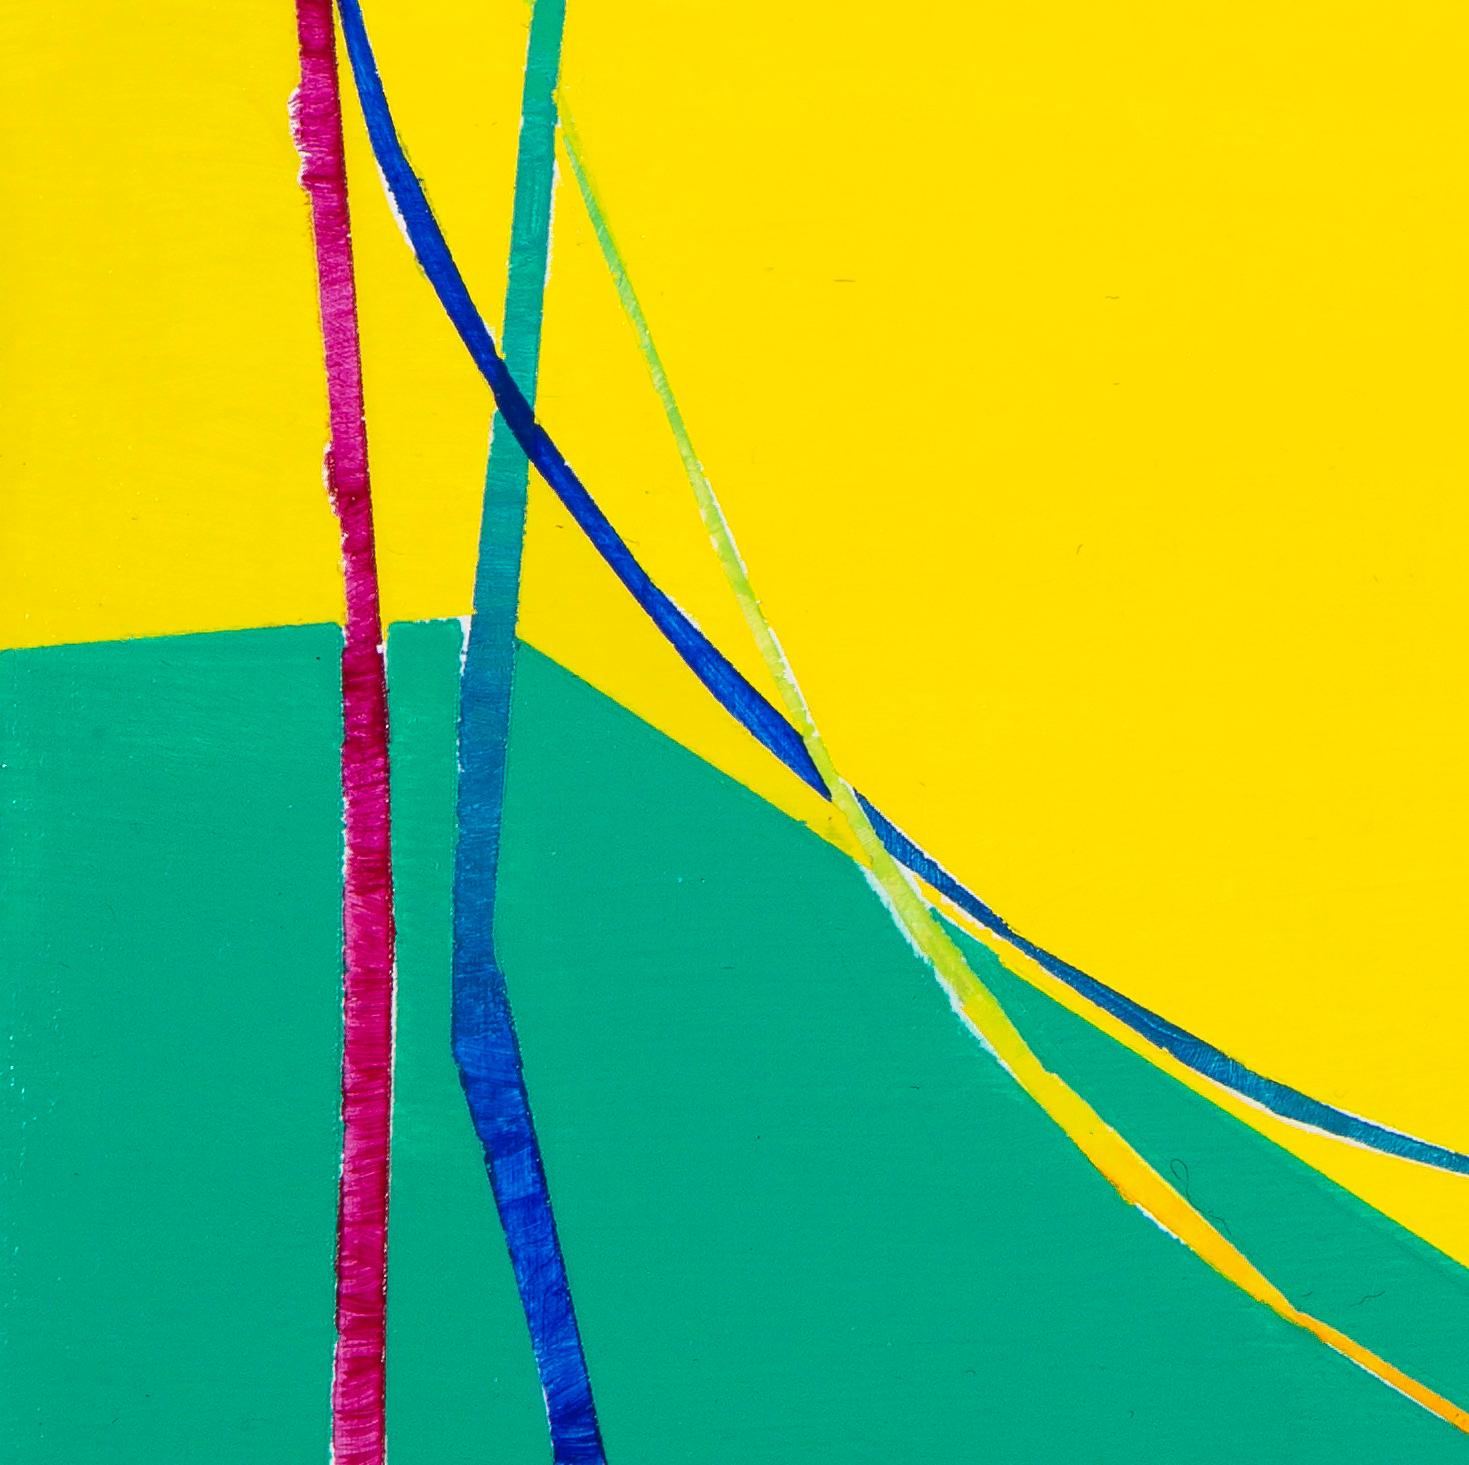 Paula Cahill's linear abstract compositions are often comprised of a single, luminous line that meanders, changes color, and seamlessly connects back to itself. This piece combines Cahill''s signature color-changing line organized as system of